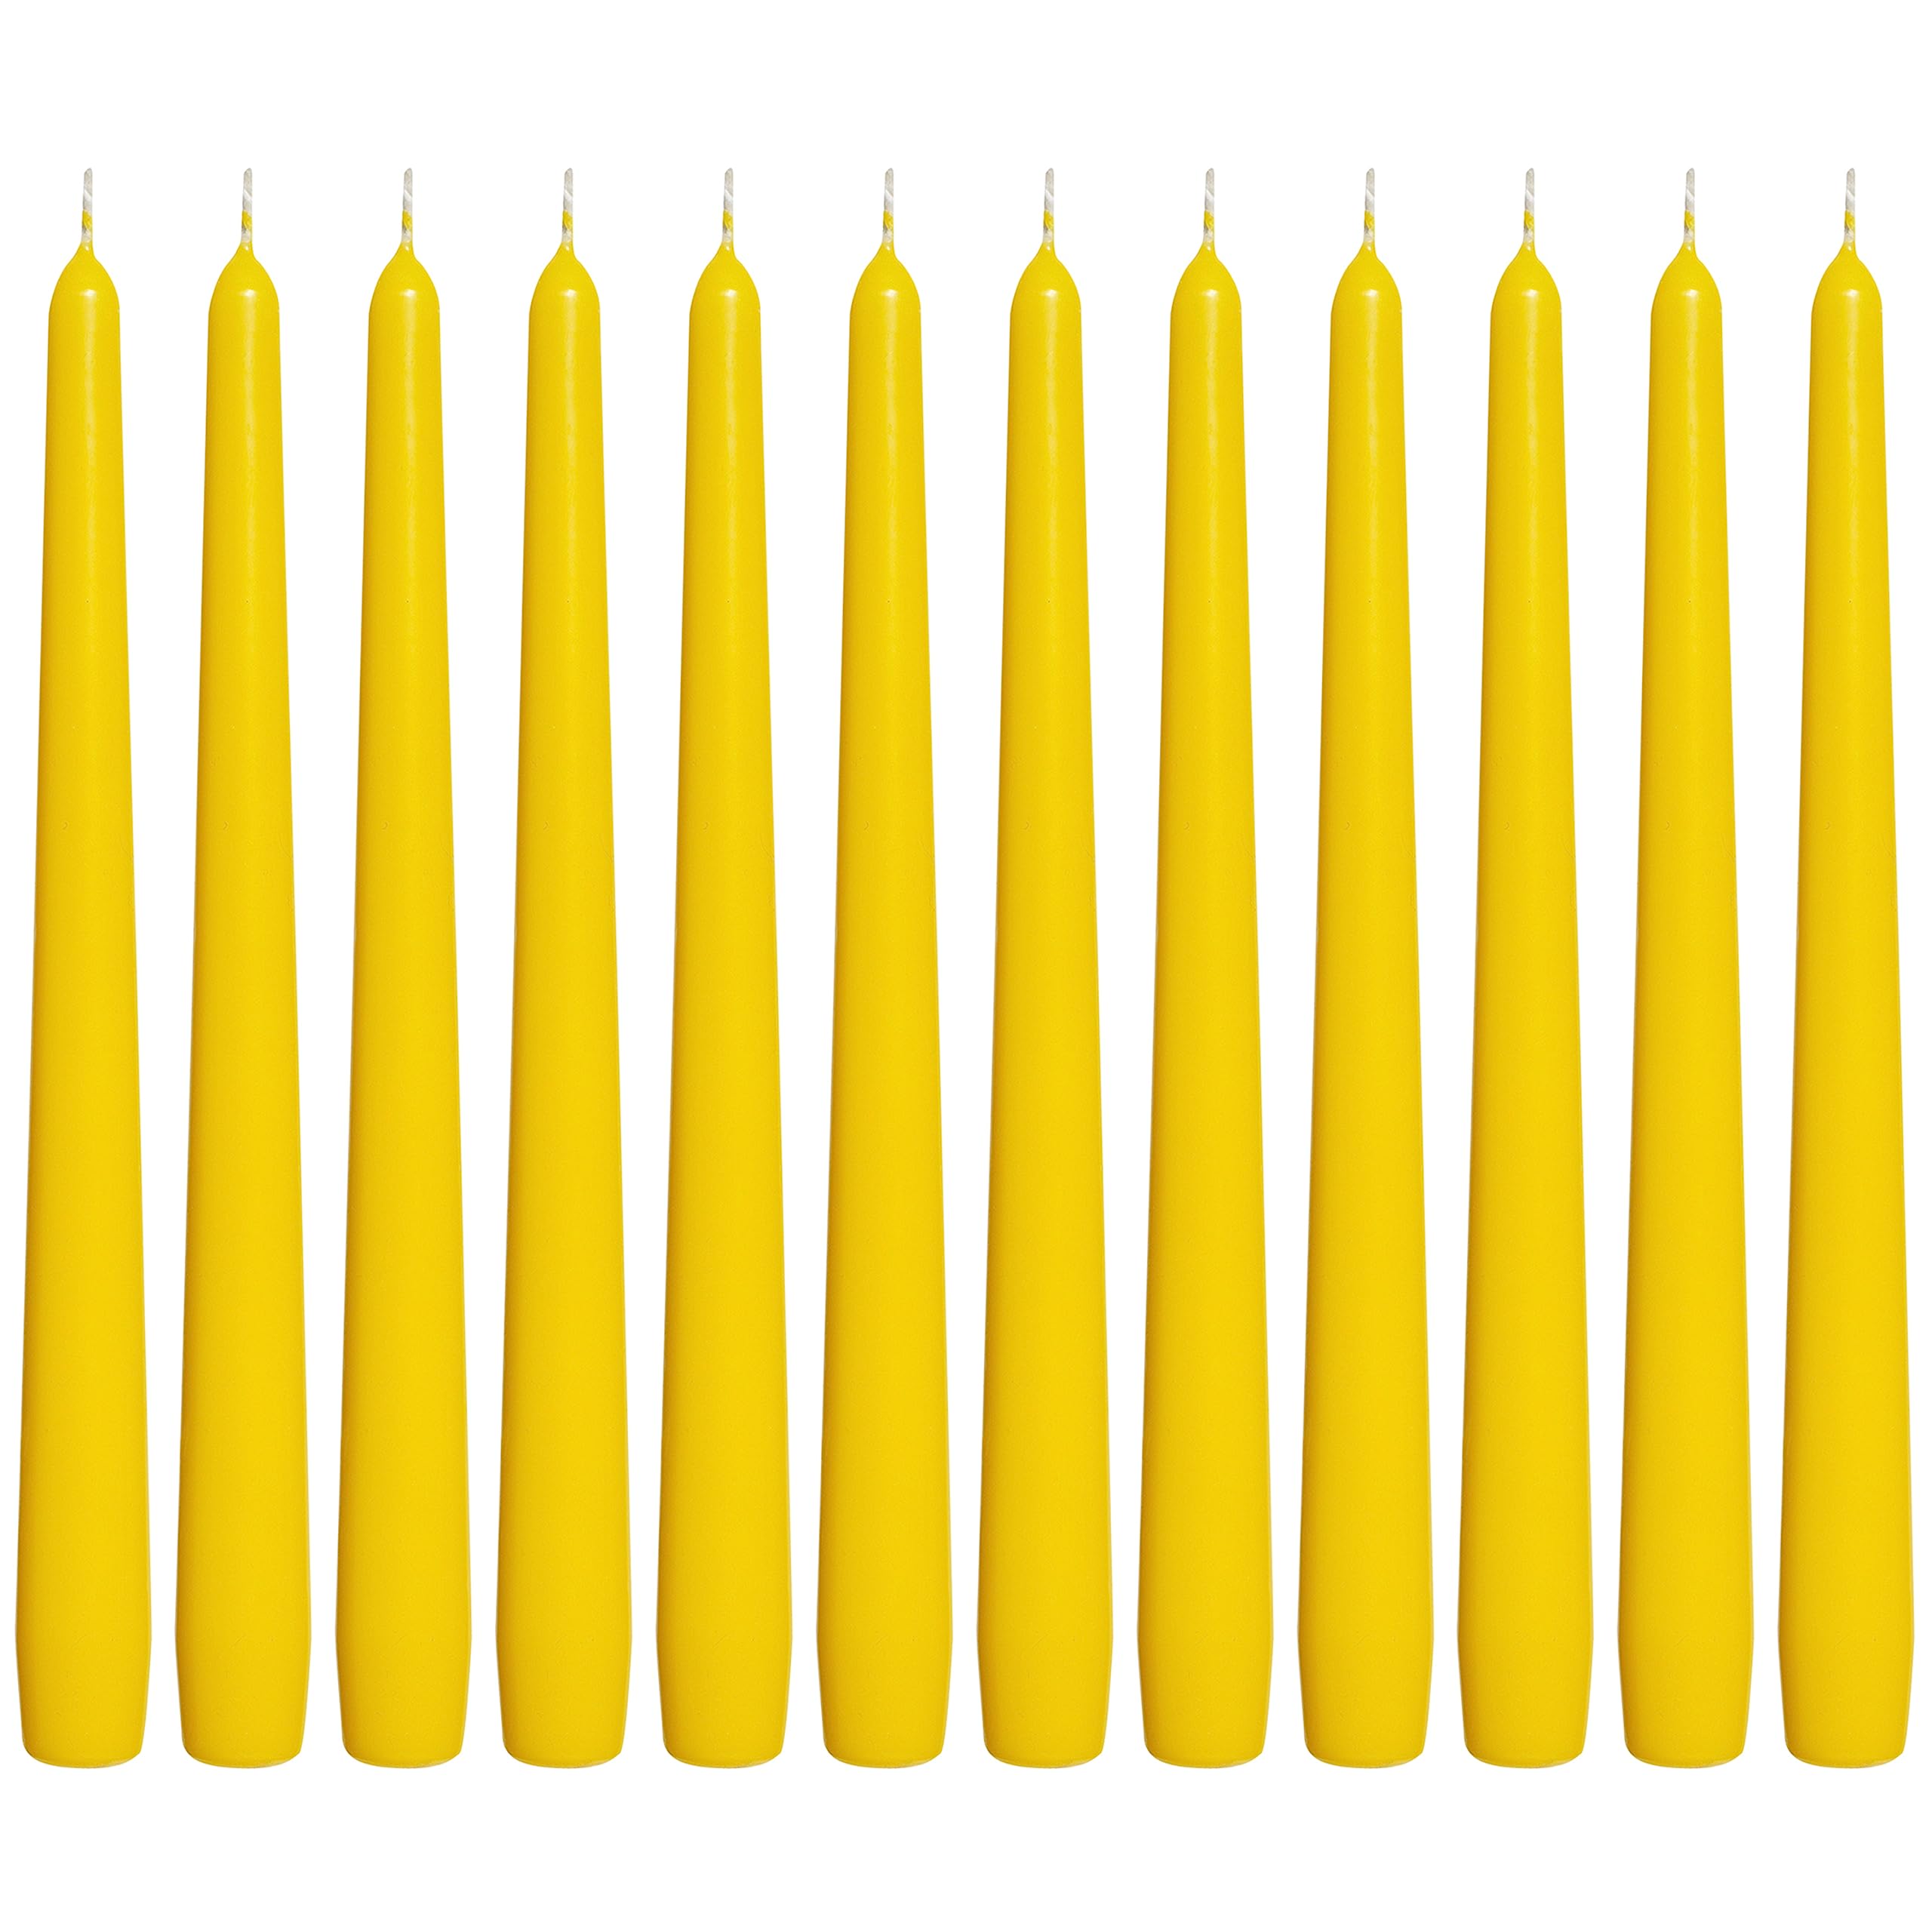 BOLSIUS Yellow Taper Candles - 12 Pack Individually Wrapped Unscented 10 Inch Dinner Candle Set - 8 Burn Hours - Premium European Quality - Smokeless & Dripless Household Wedding & Party Candlesticks  - Very Good